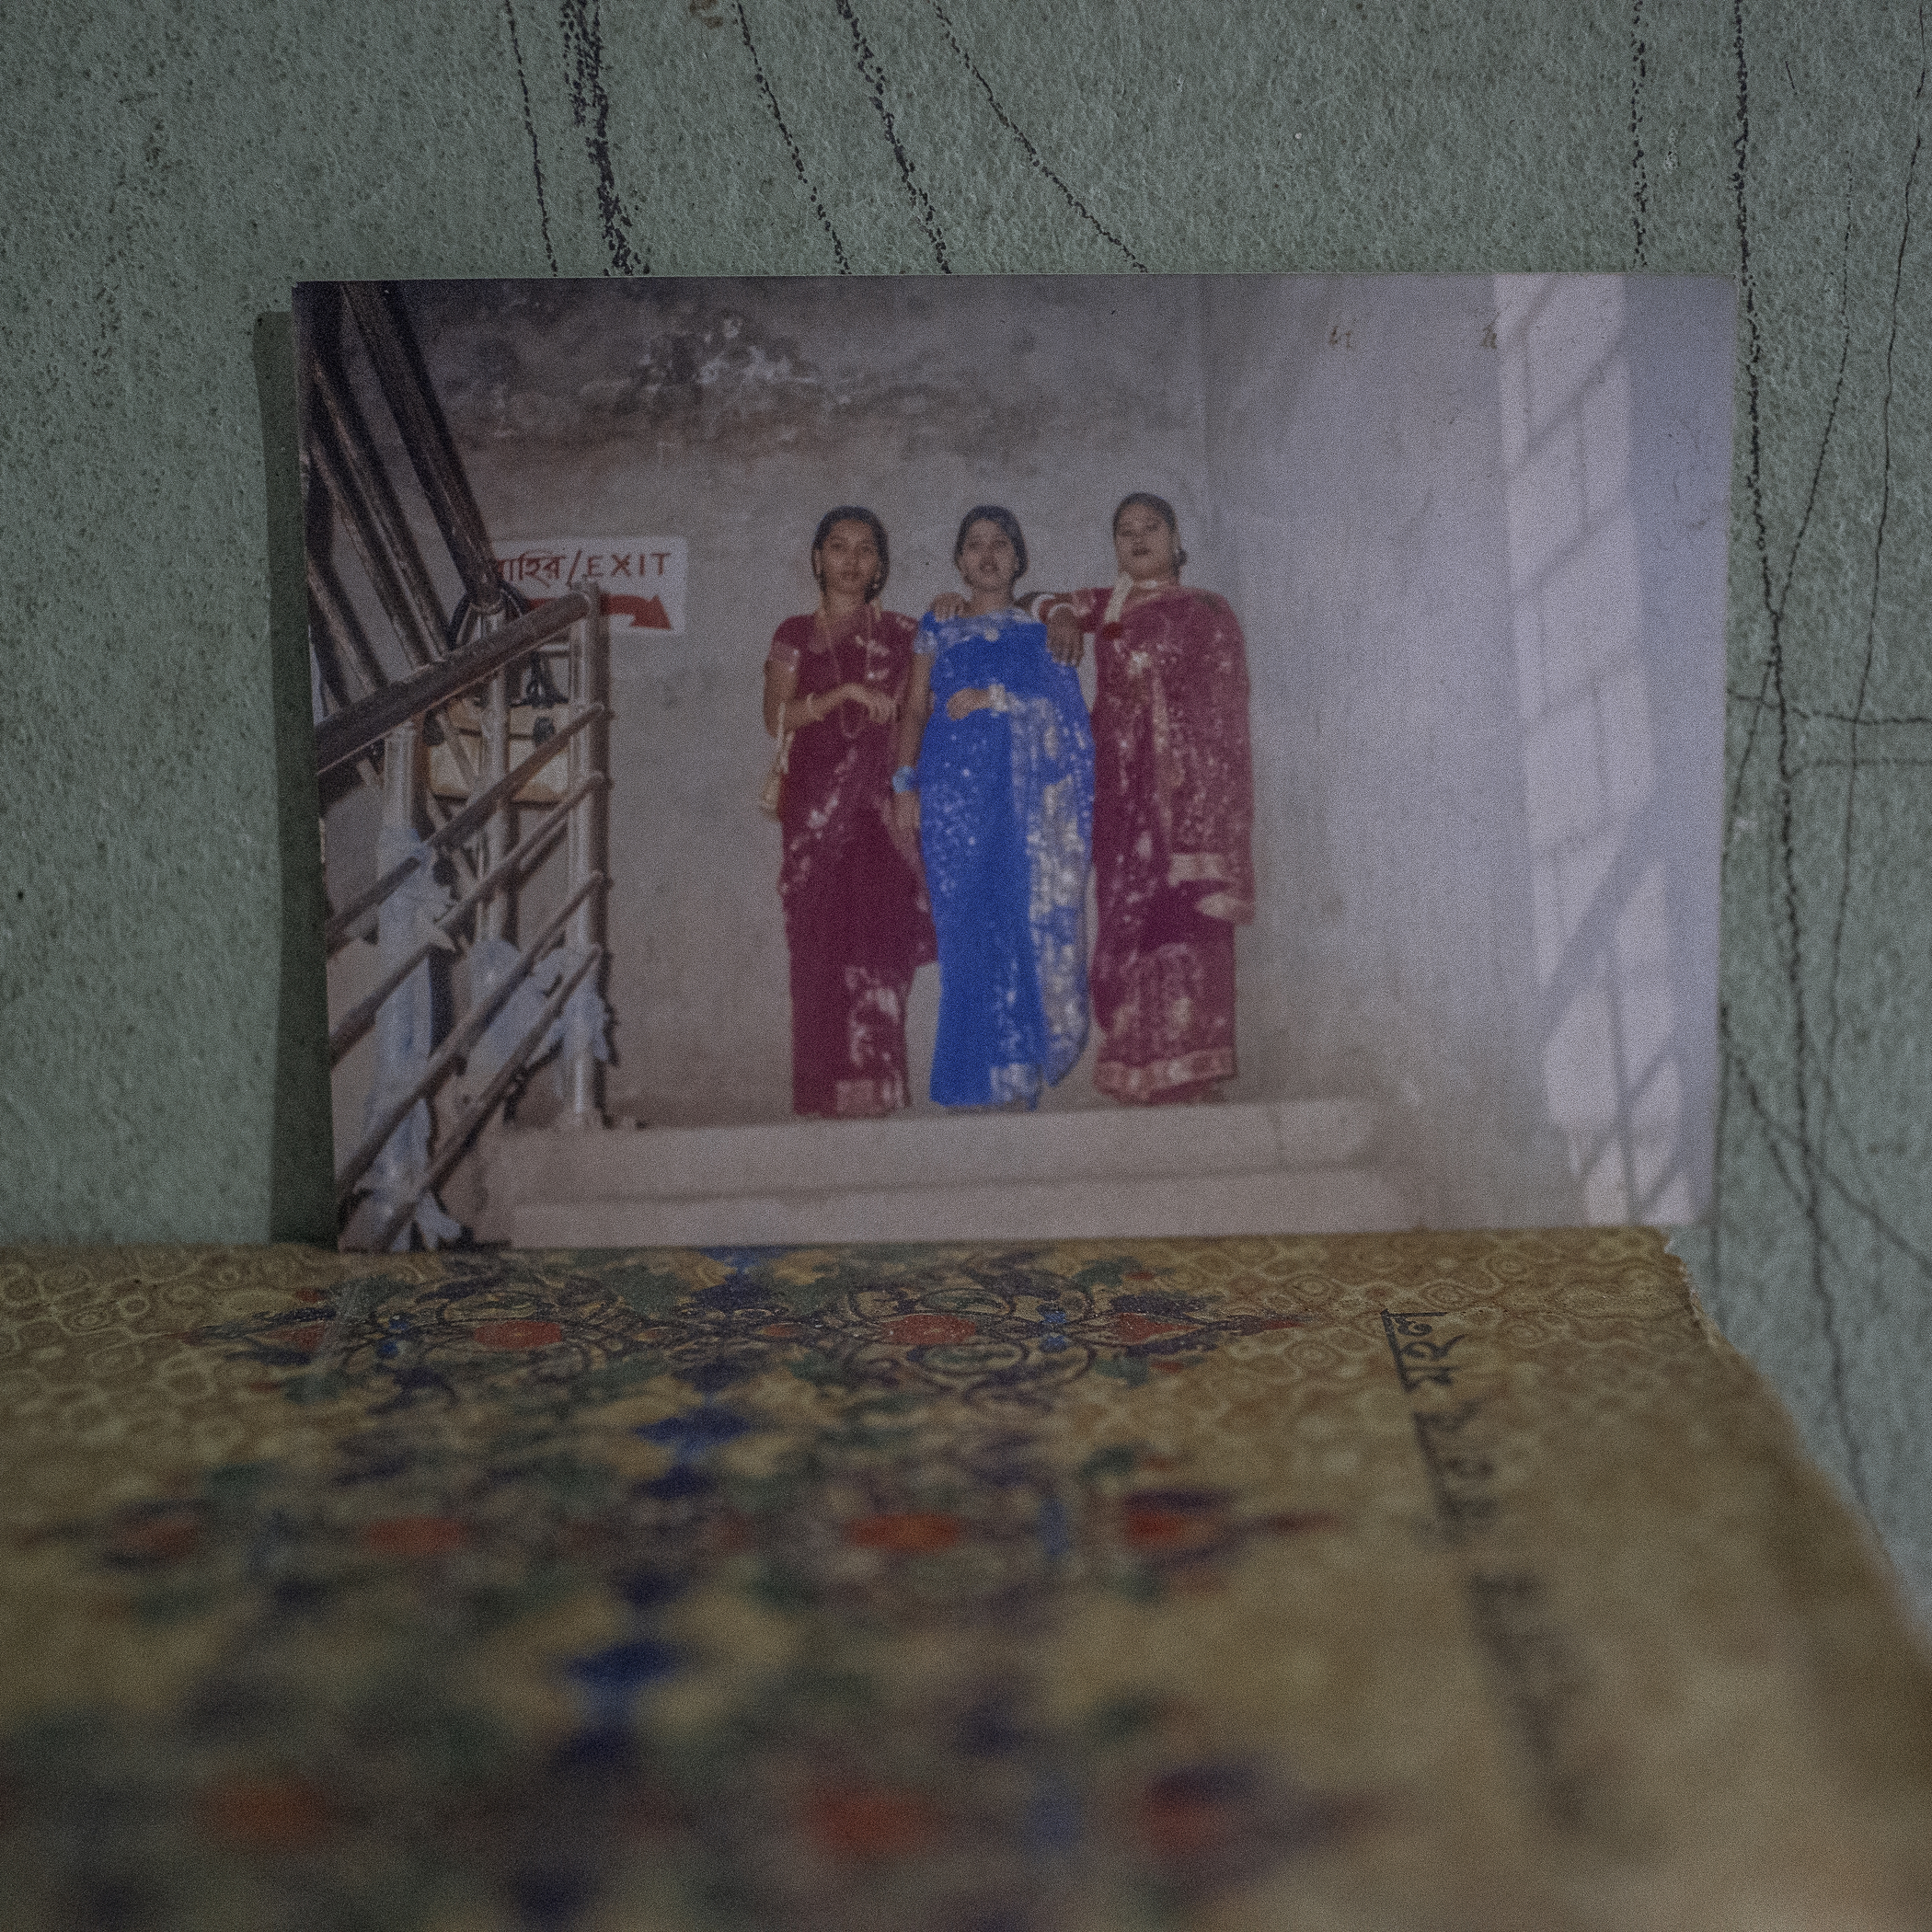 Lipi Aktar with her friends who died in Rana plaza collapse